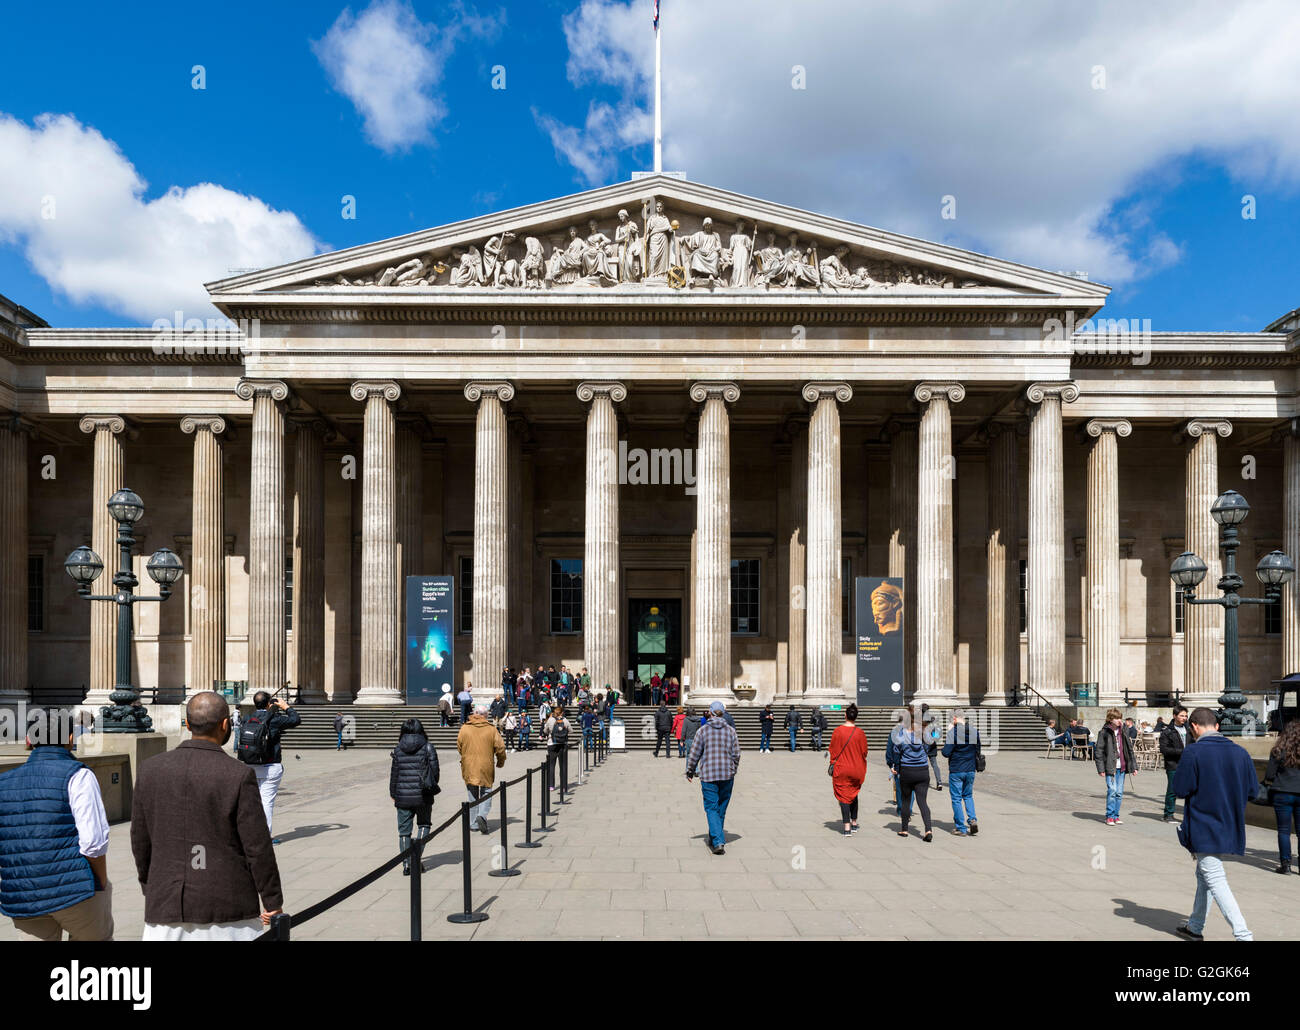 The main entrance to the British Museum, Great Russell Street, Bloomsbury, London, England, UK Stock Photo